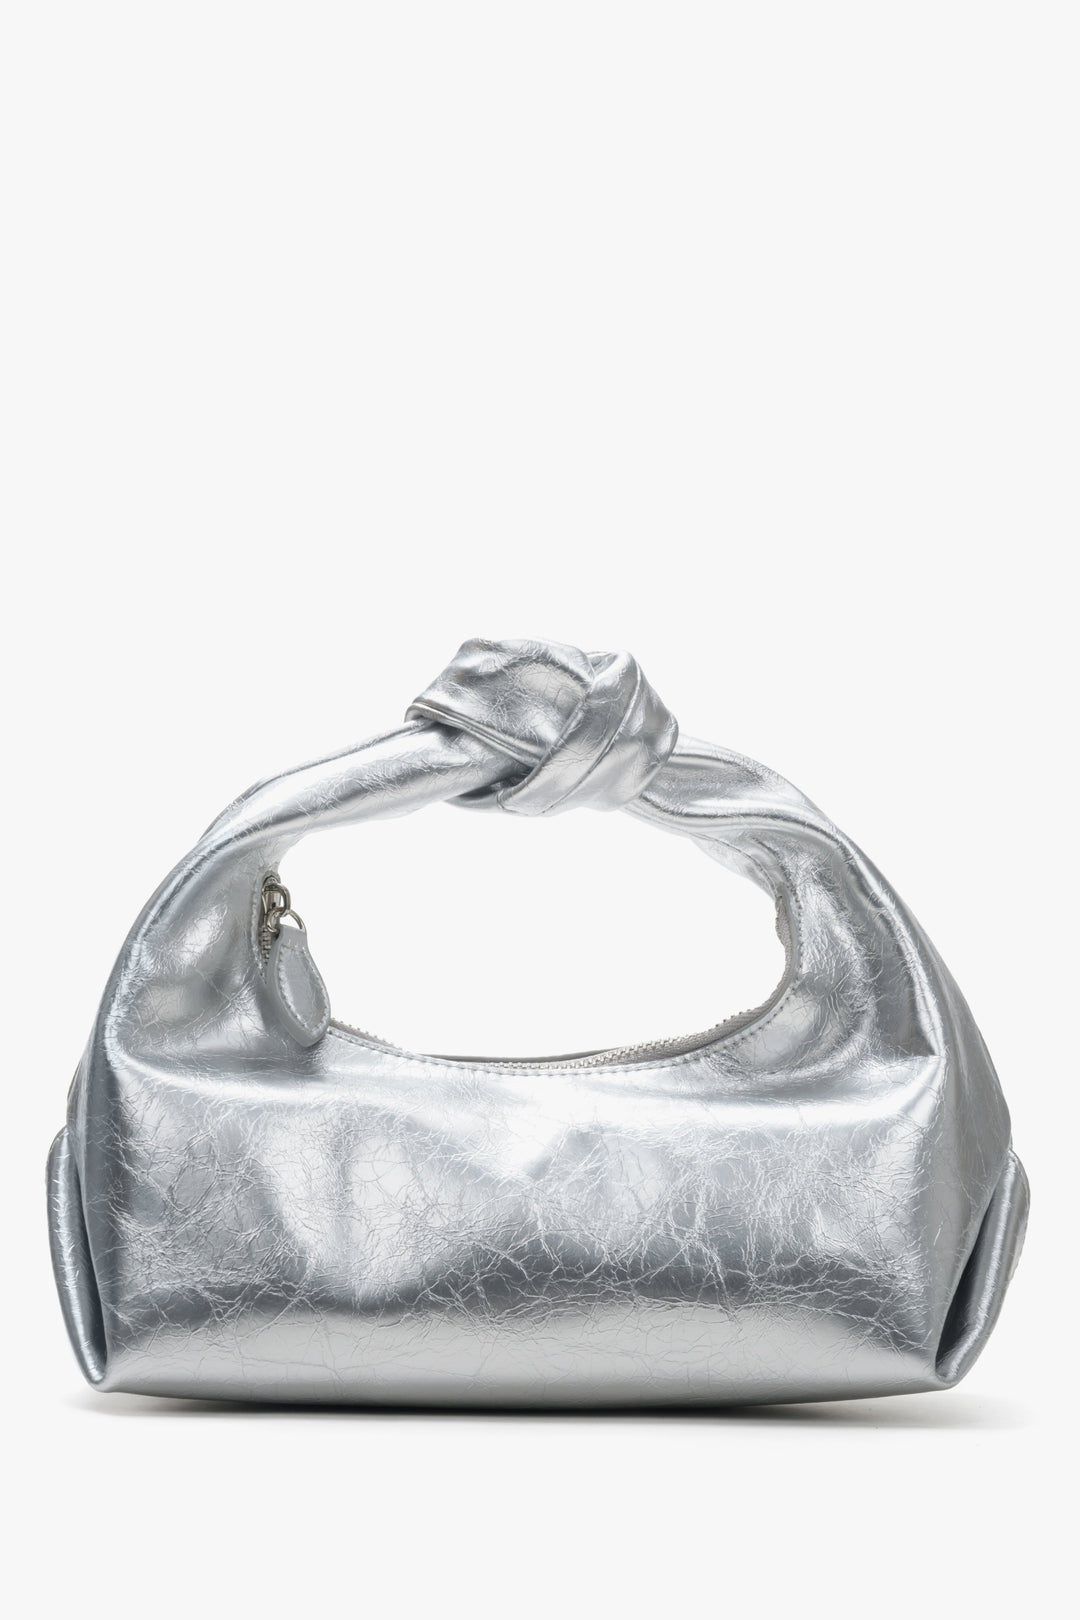  Leather silver women's evening bag with a braided handle by Estro.